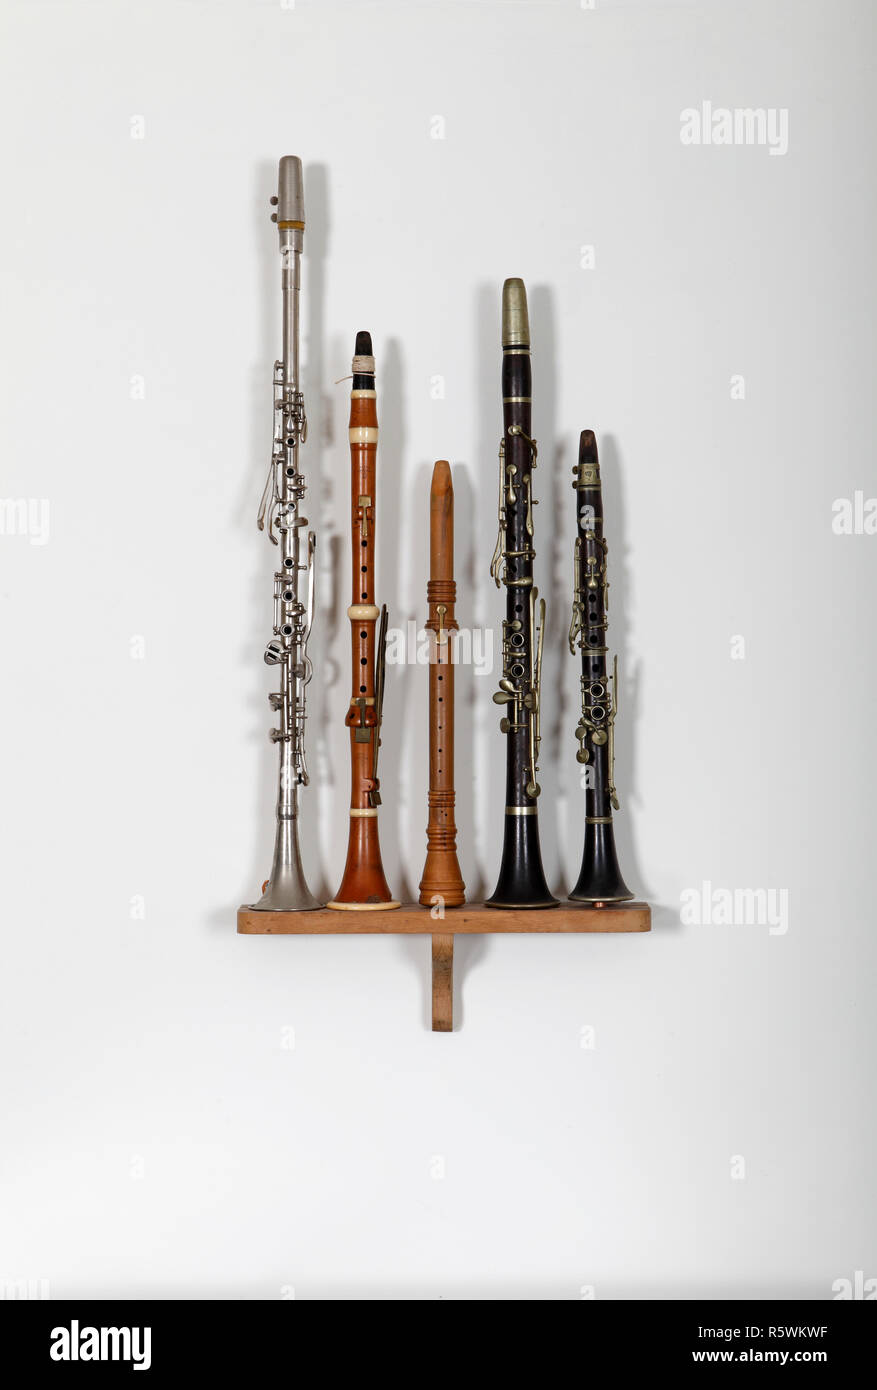 Collection of 5 clarinets from across the ages, including a modern Turkish clarinet. Stock Photo